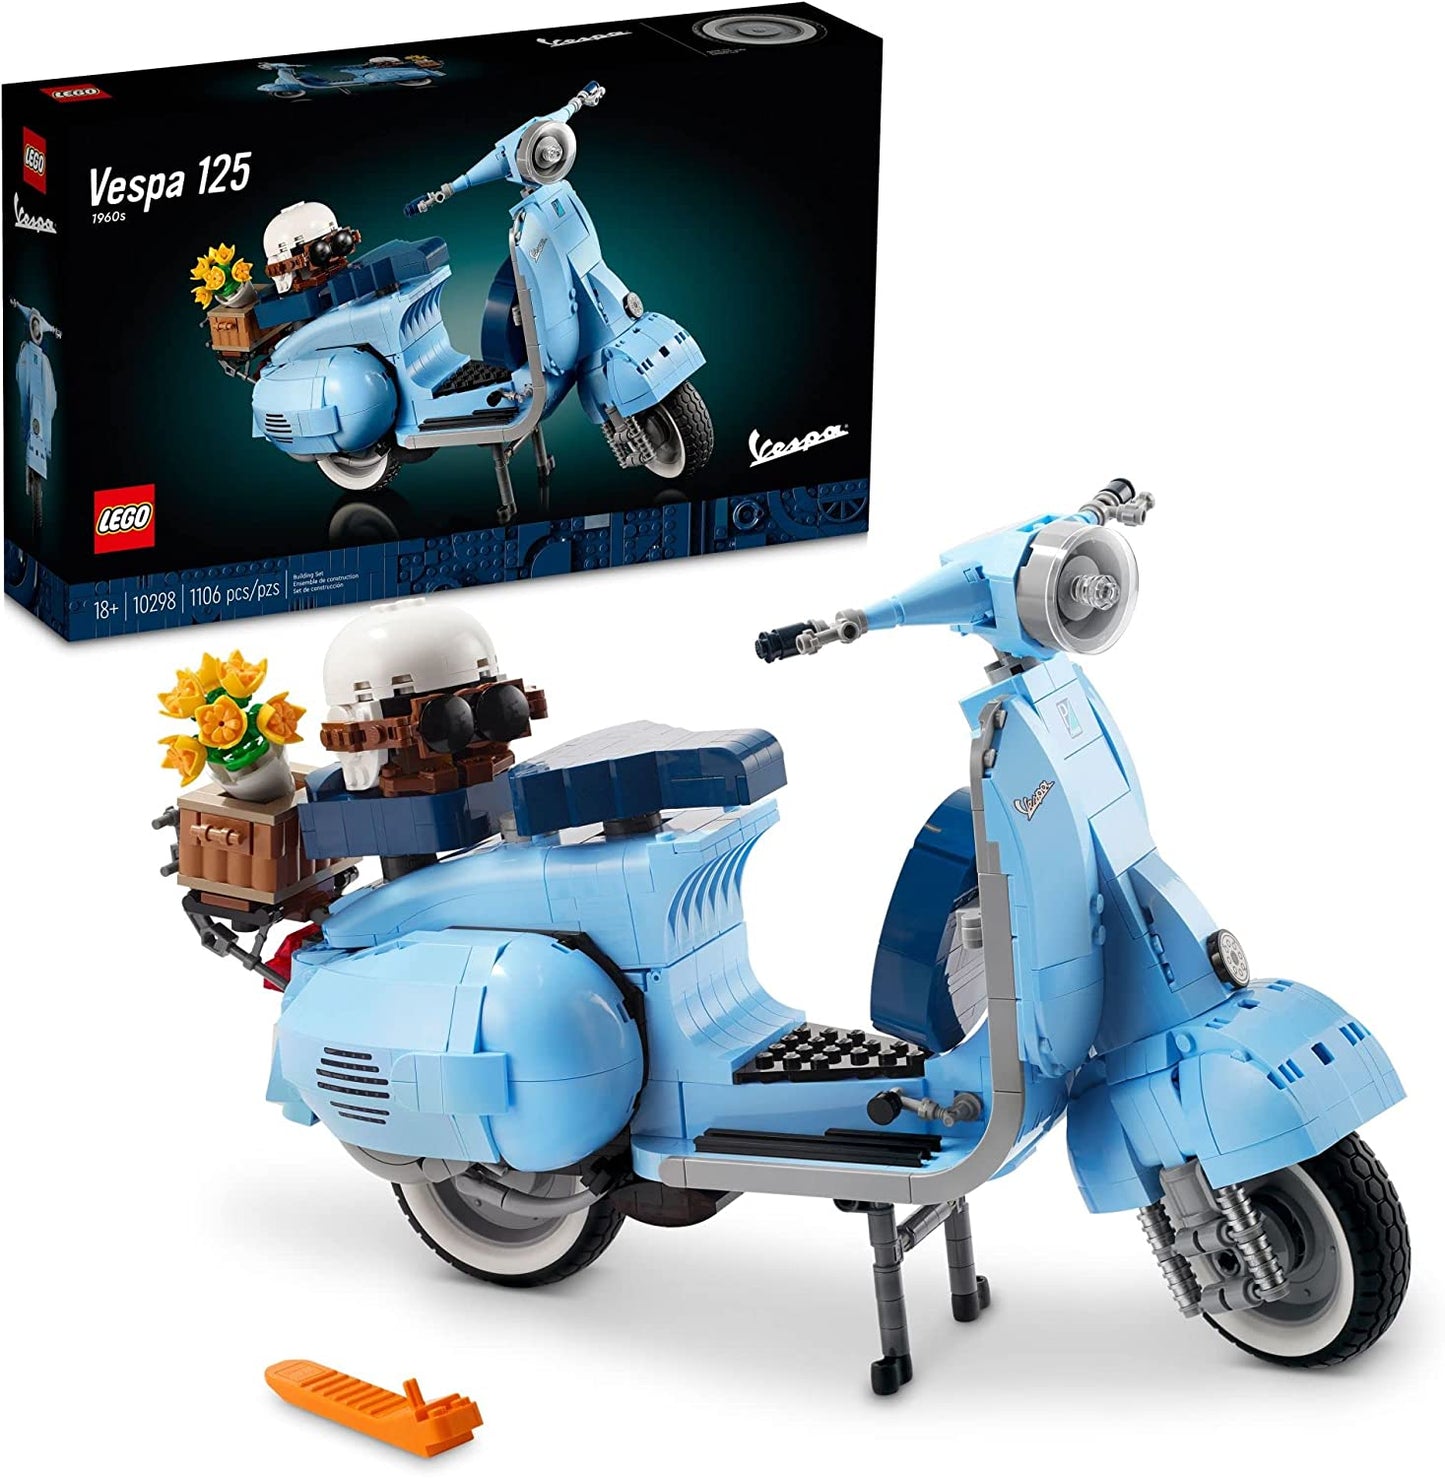 LEGO - Icons Vespa 125 Scooter 10298